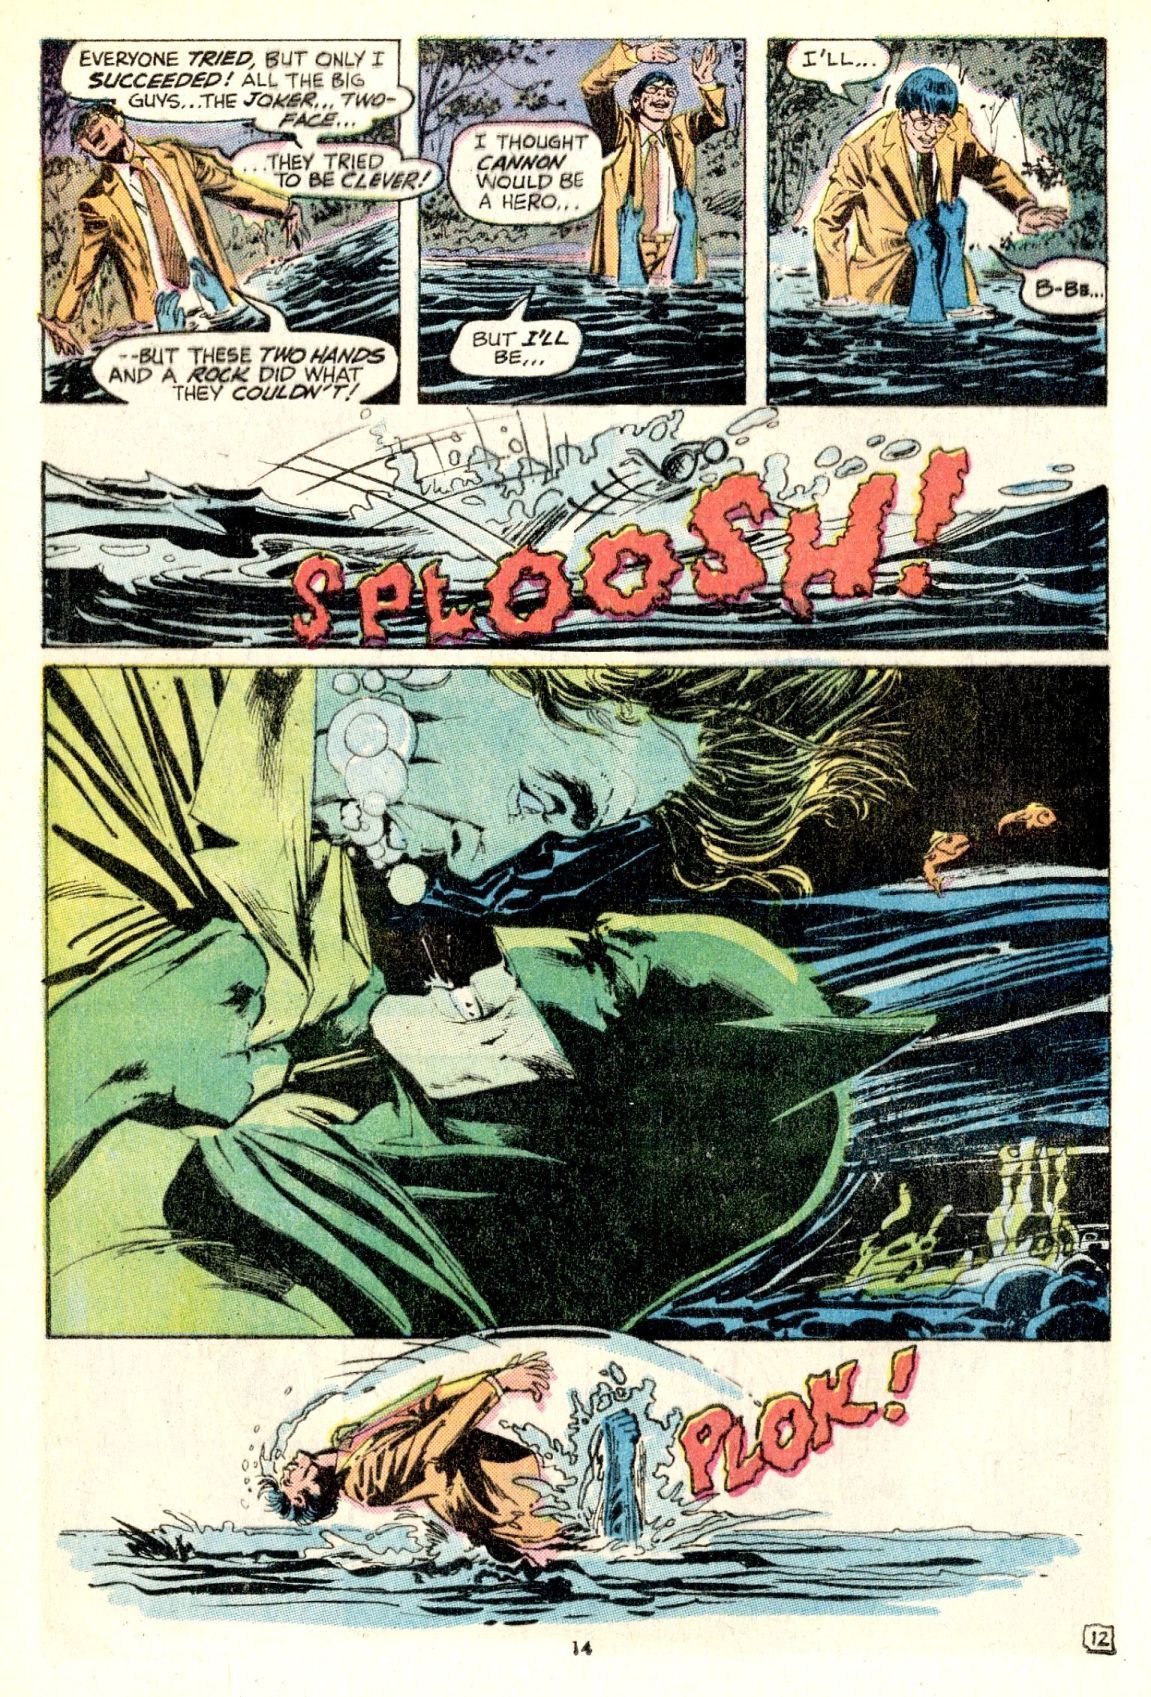 COOL PAGES — Detective Comics #439 (“Night of the Stalker!” -...